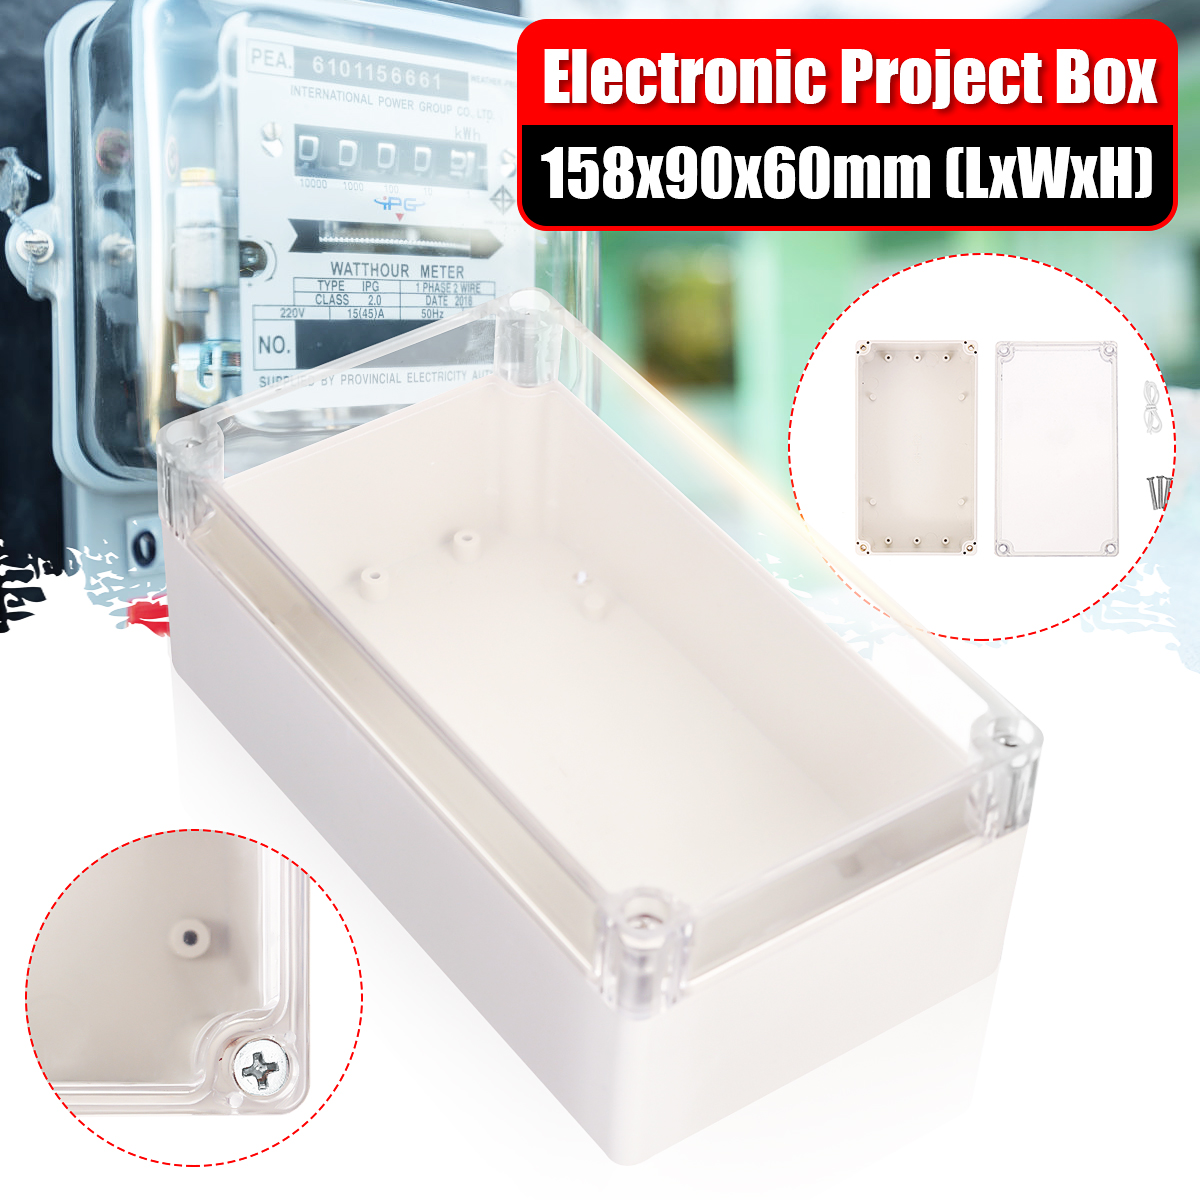 Plastic-Waterproof-Electronic-Project-Box-Clear-Cover-Electronic-Project-Case-1589060mm-1595735-1